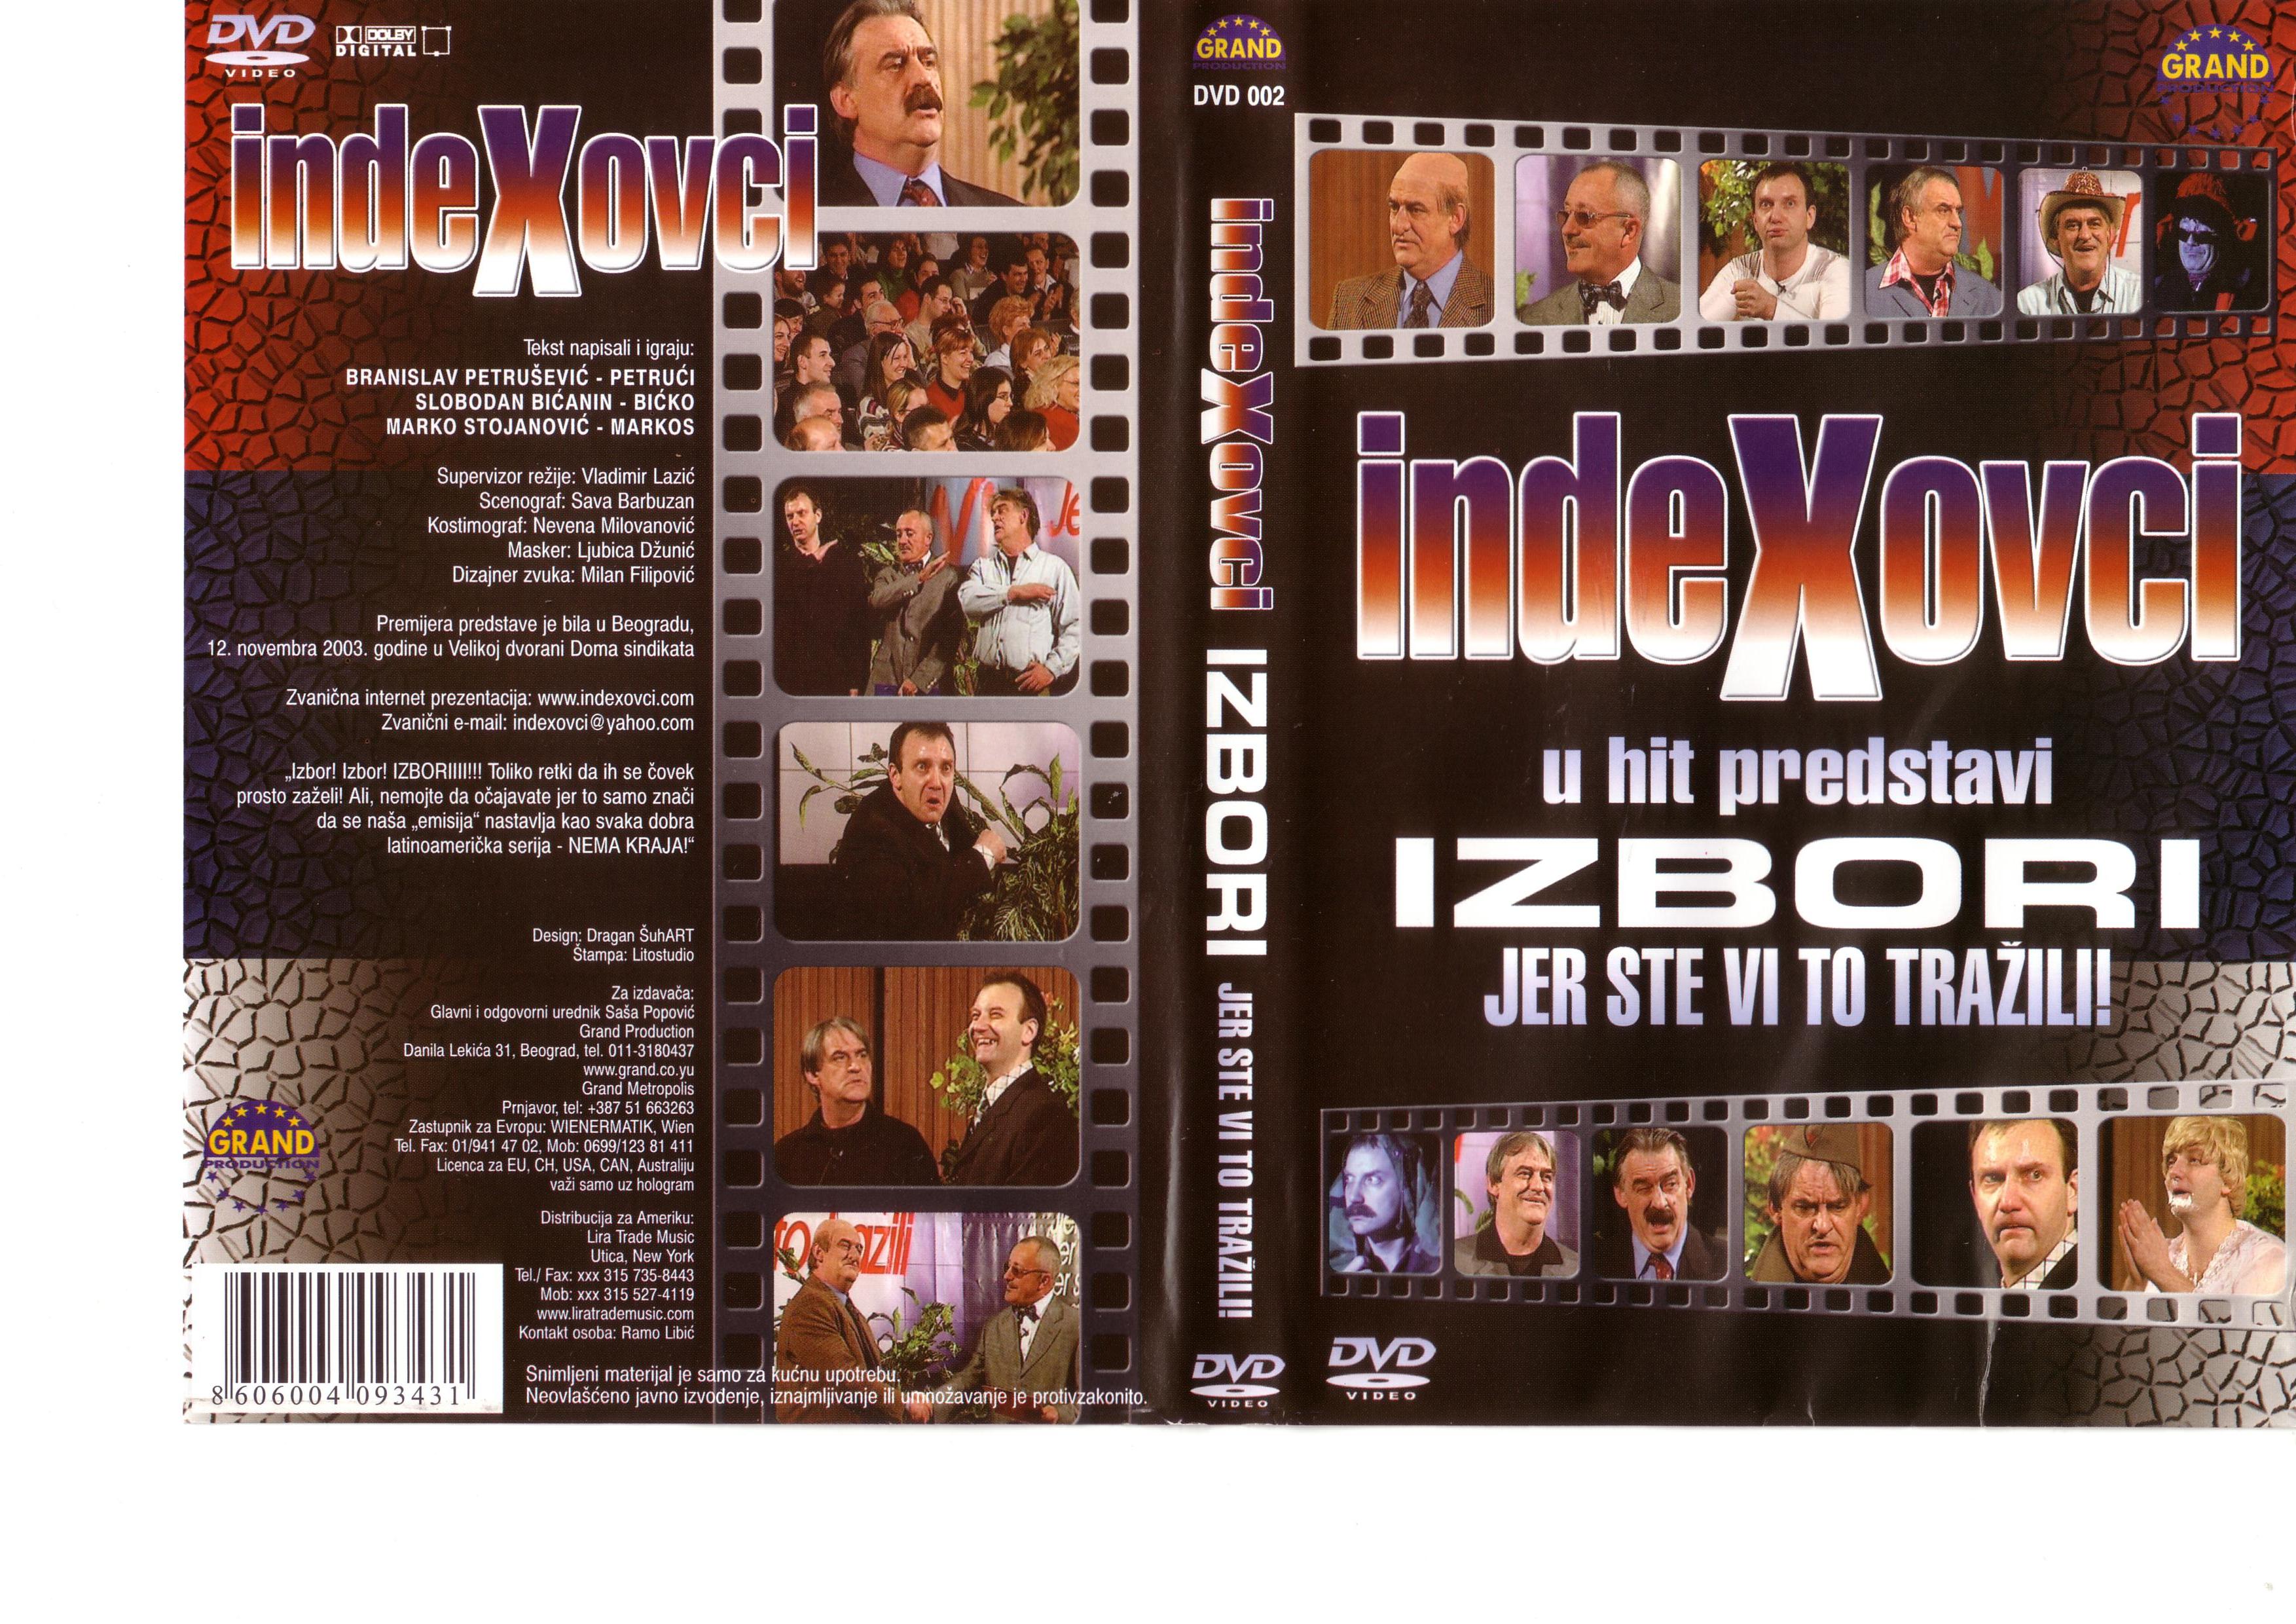 Click to view full size image -  DVD Cover - I - DVD - INDEXOVCI - DVD - INDEXOVCI.JPG